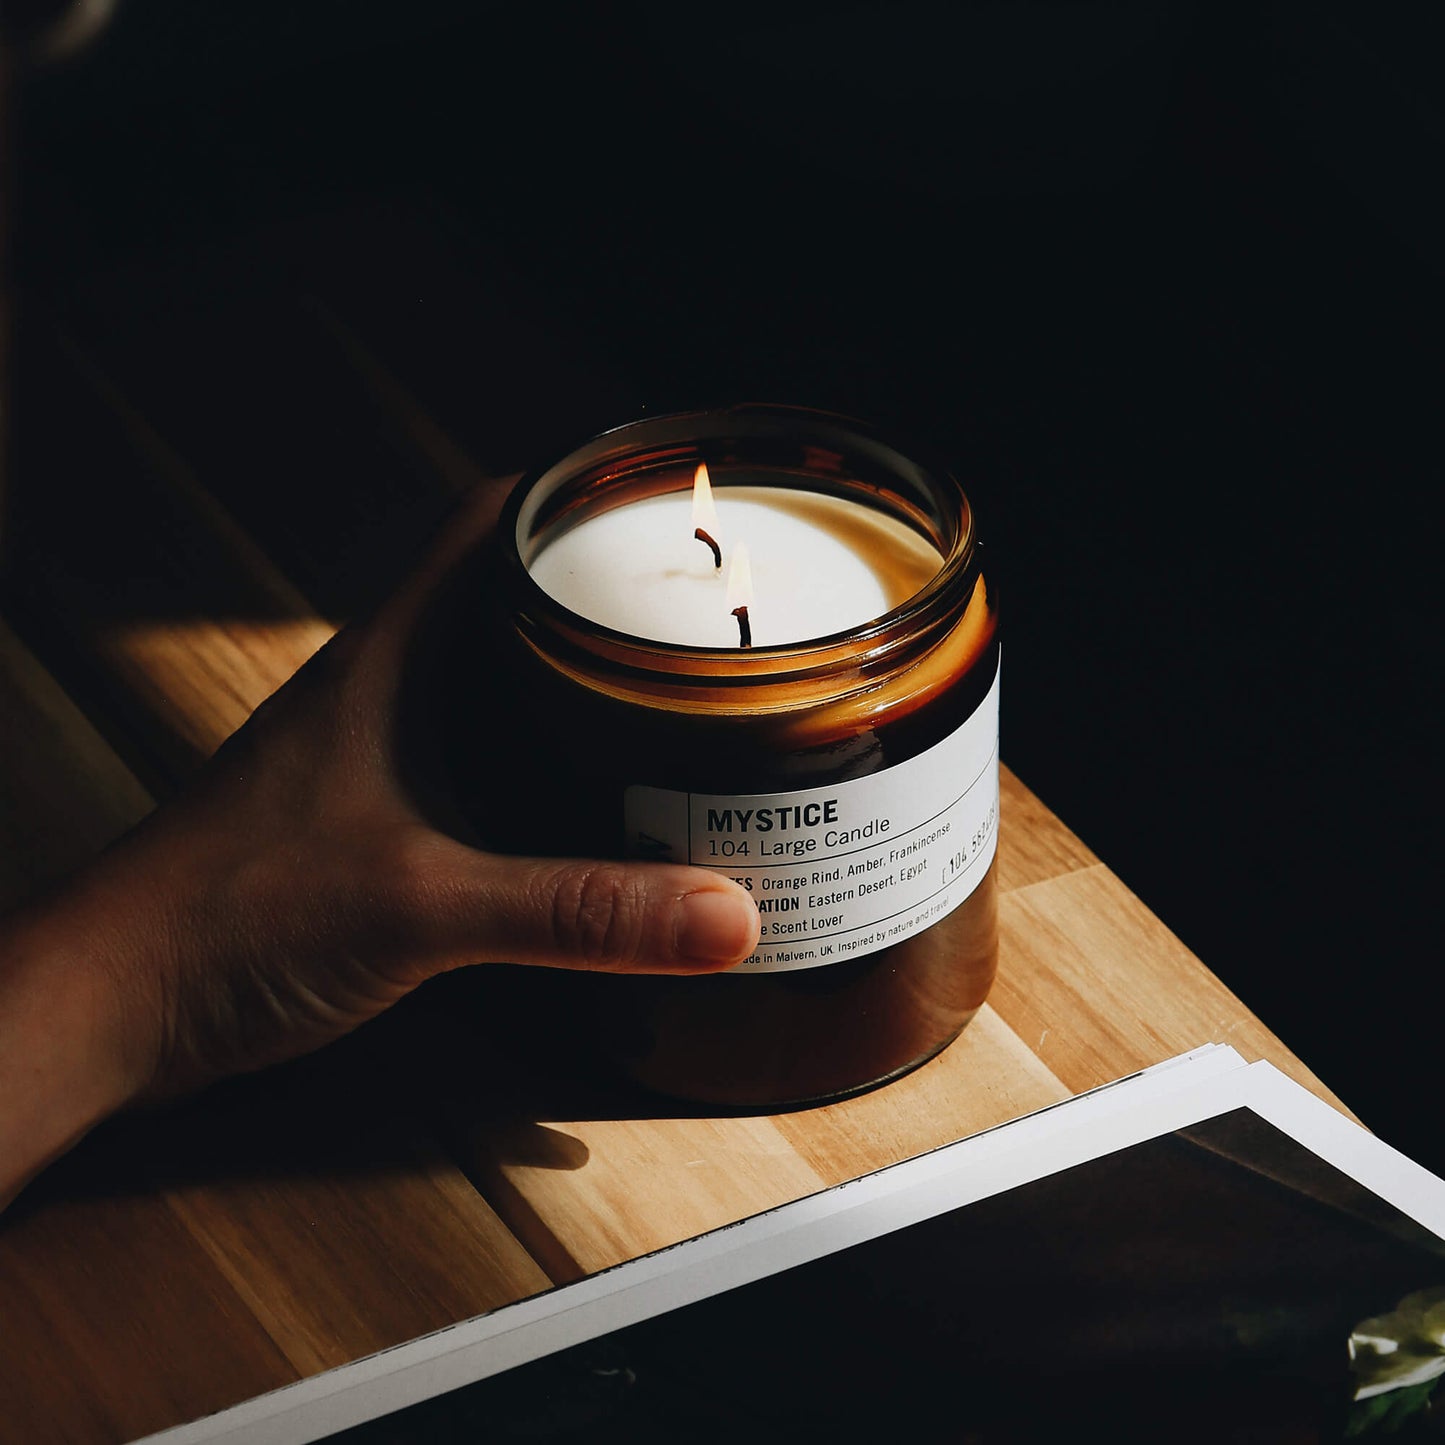 The Candle Club Subscription